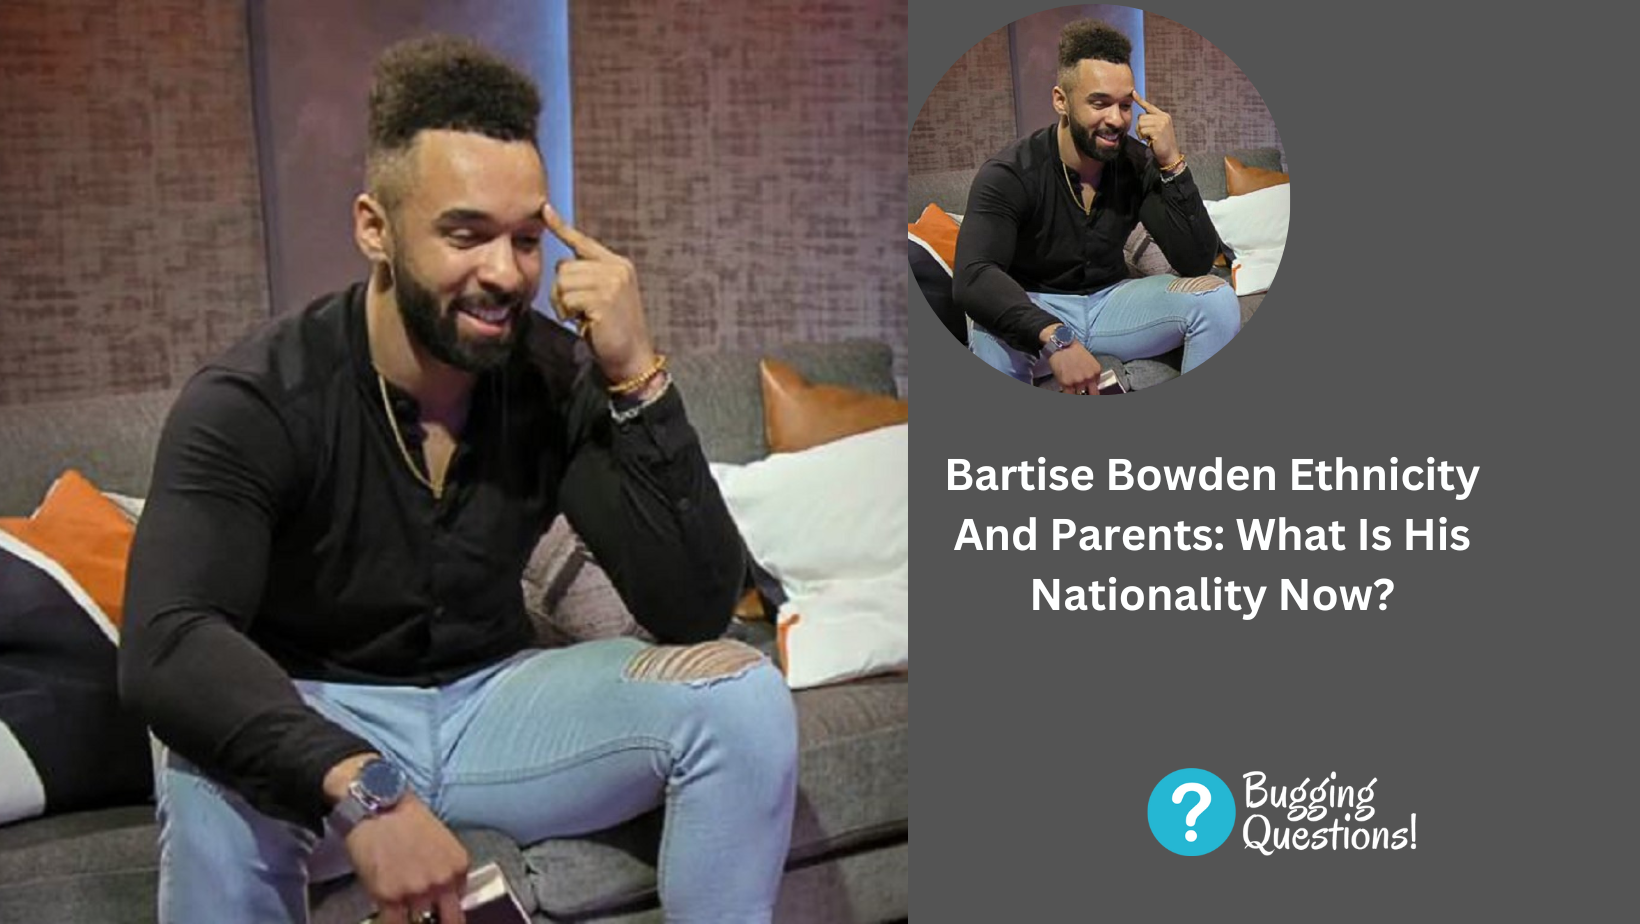 Bartise Bowden Ethnicity And Parents: What Is His Nationality Now?